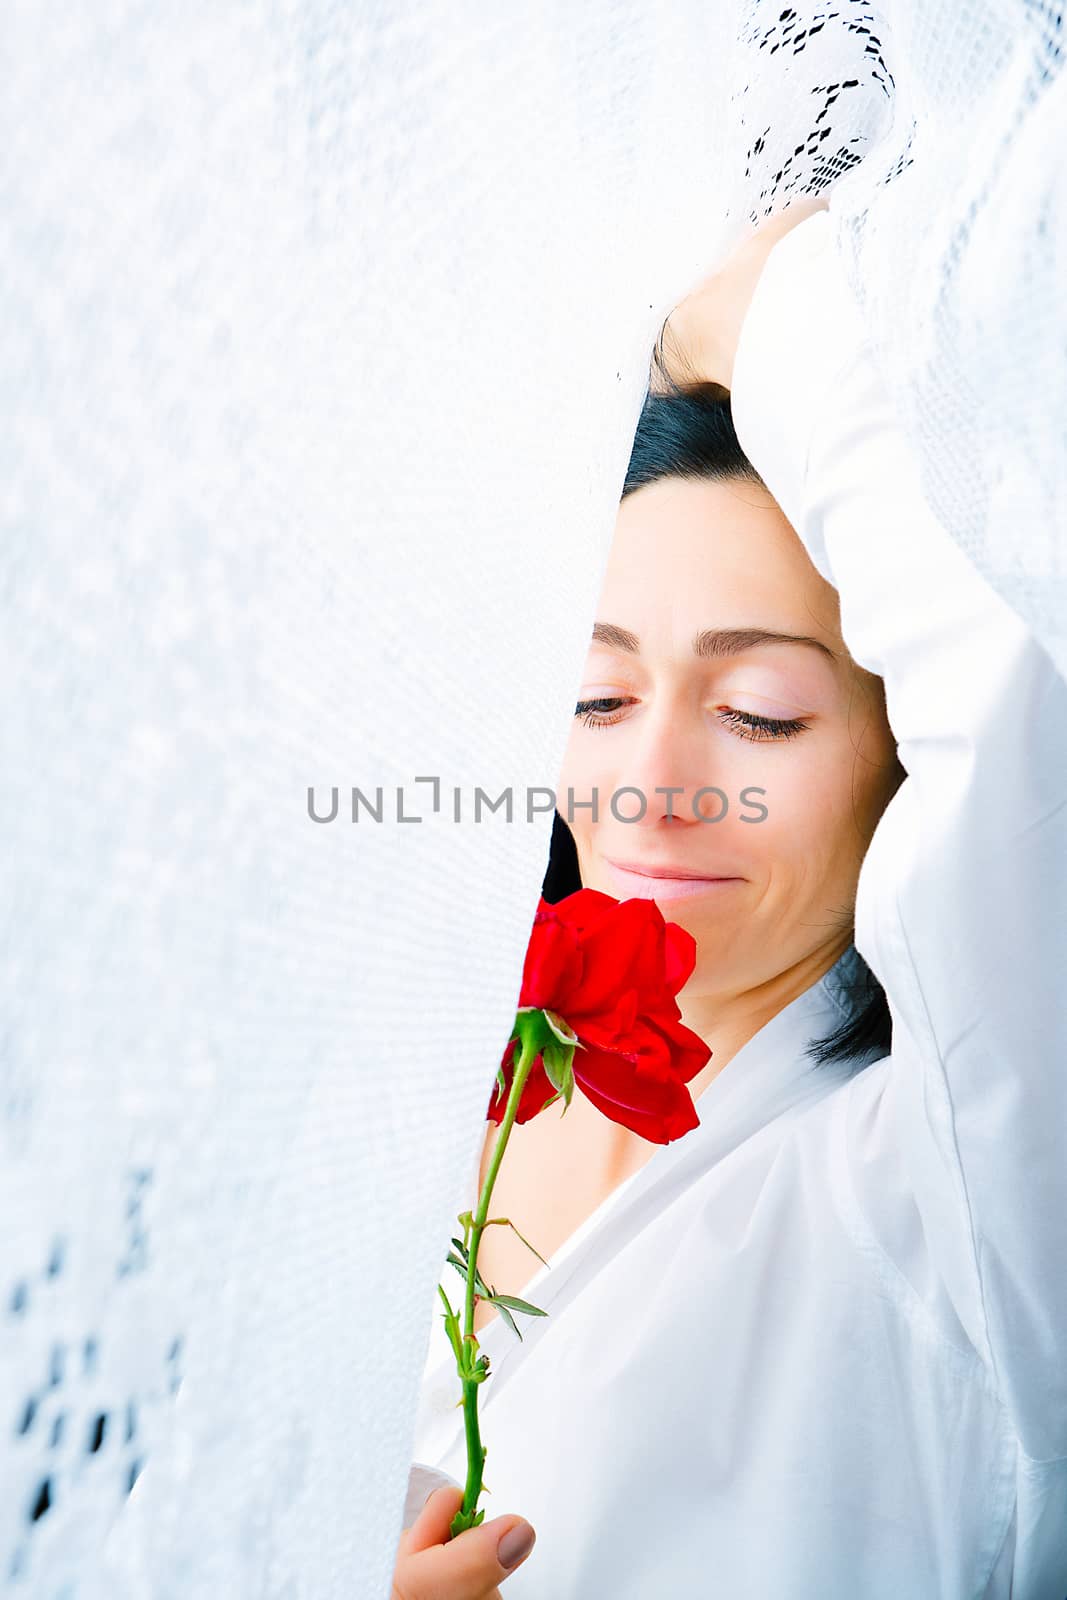 portrait of a young woman with a red rose in her hands by ndanko